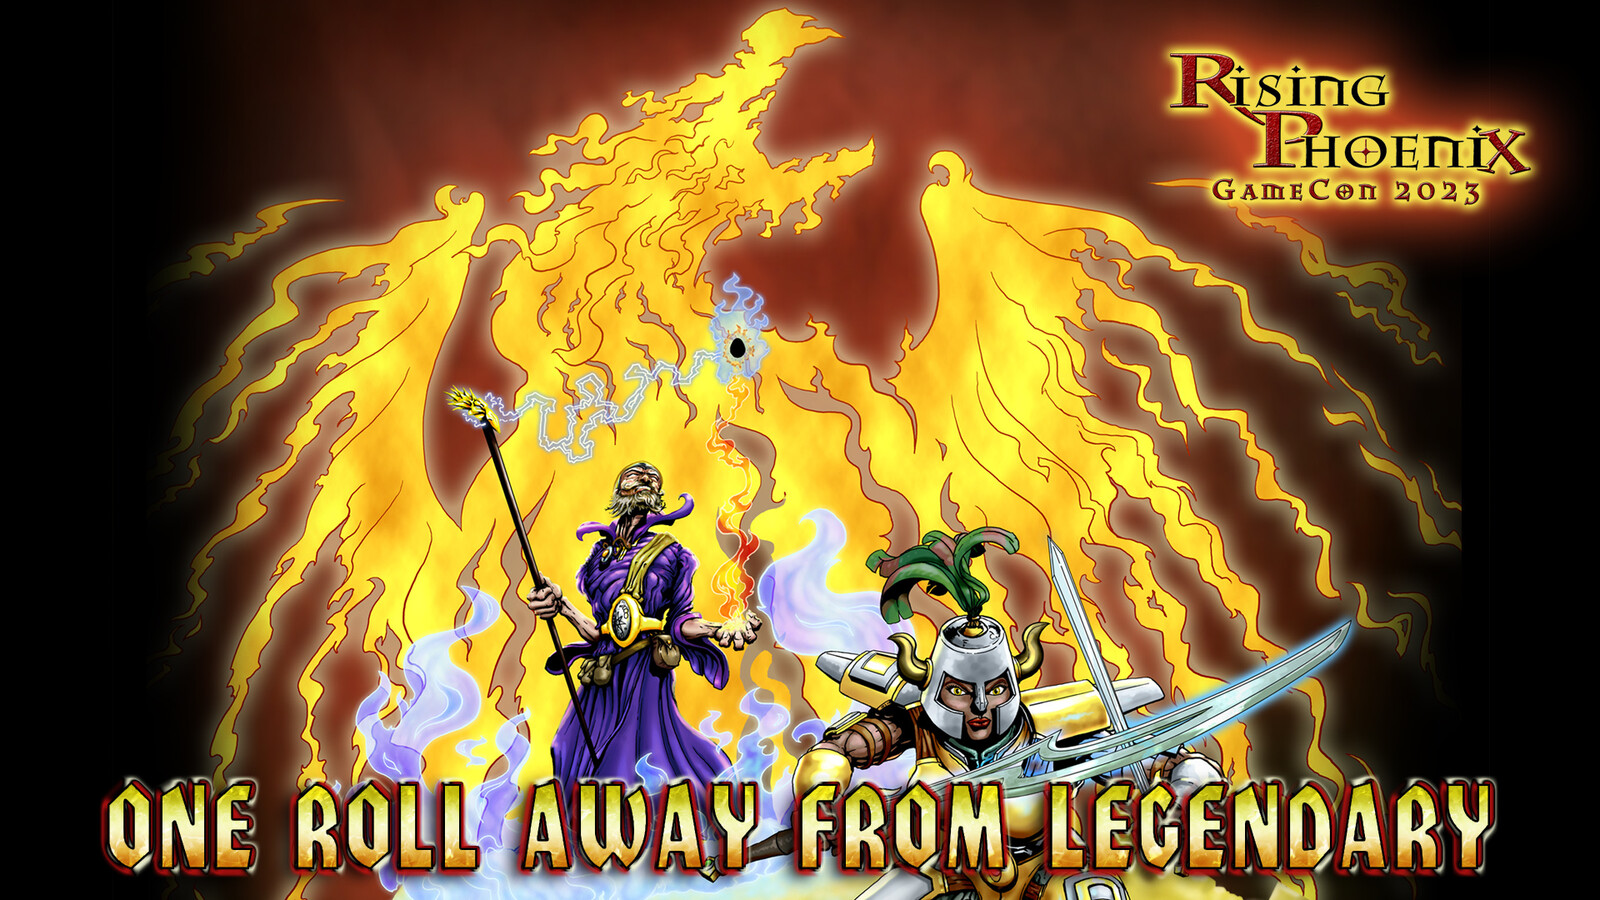 "Legendary" Annual Illustration and Graphics for Rising Phoenix GameCon 2023